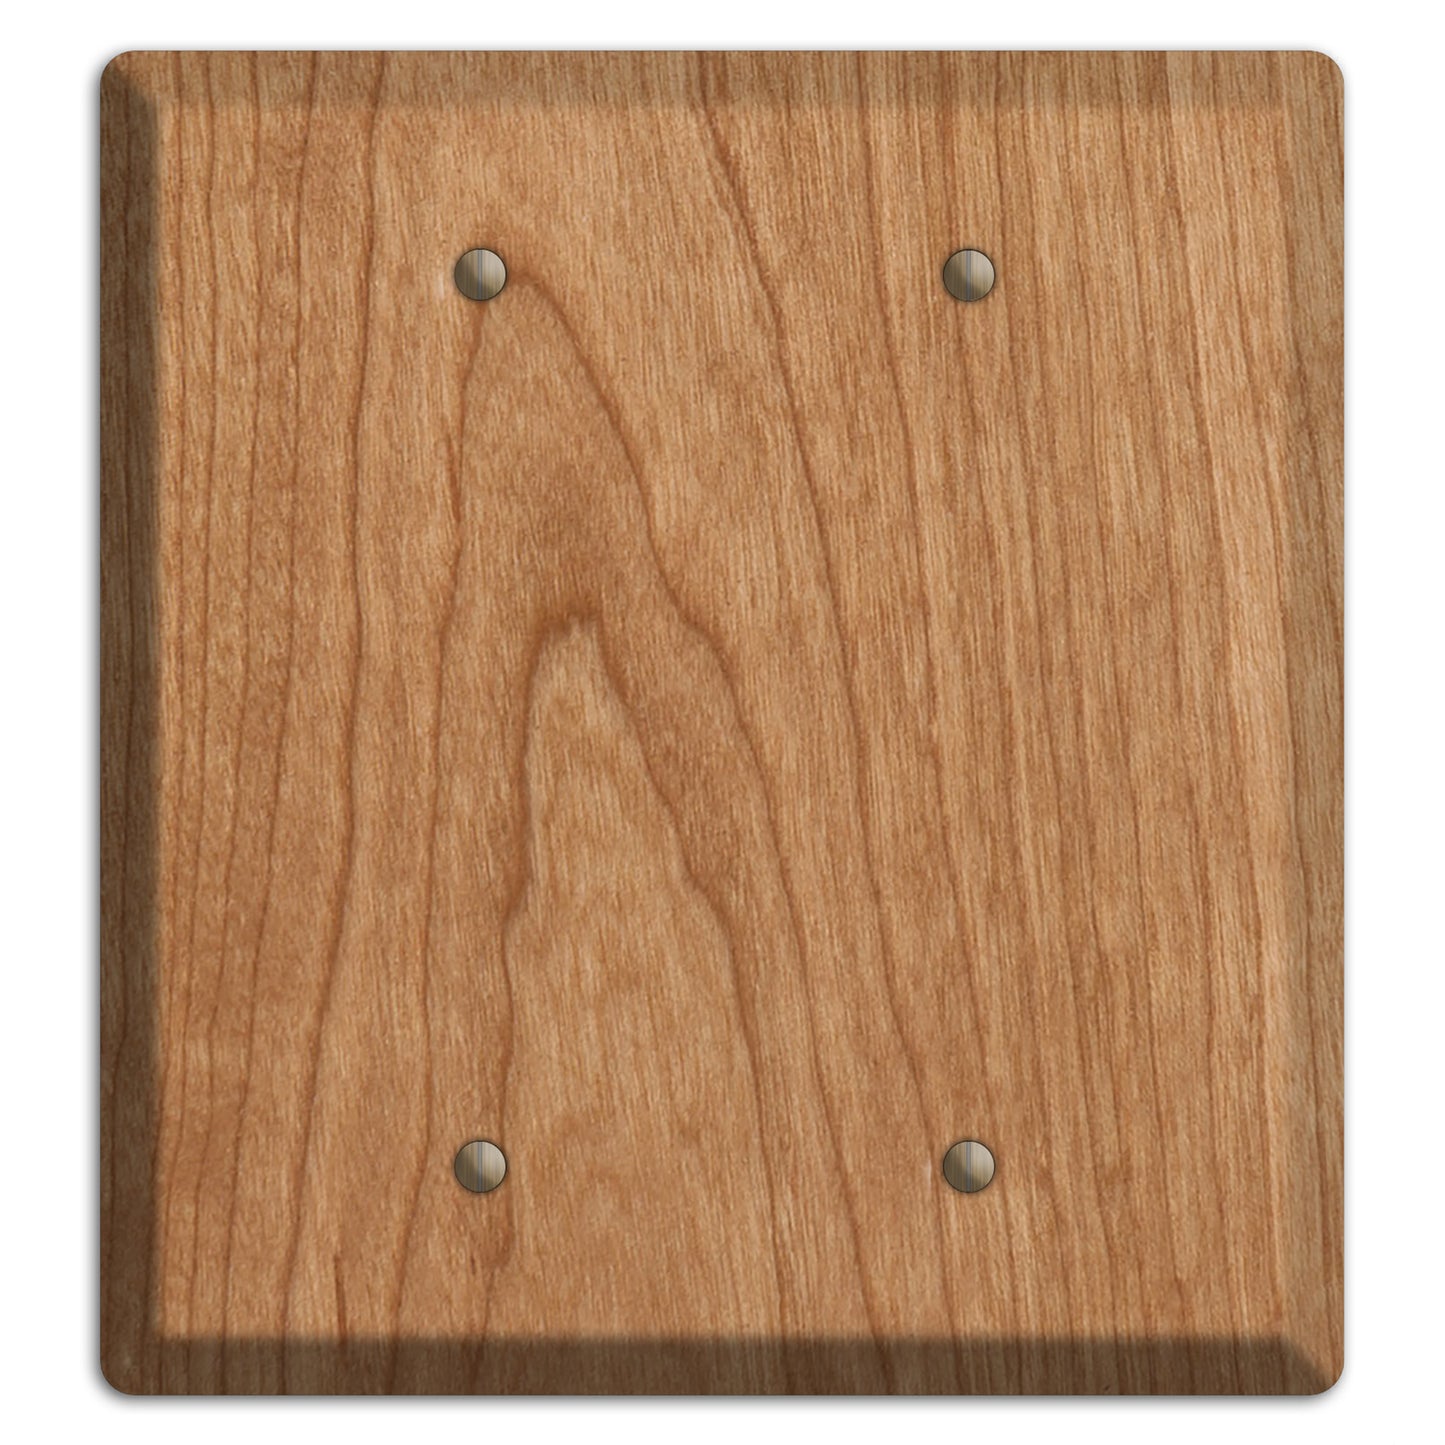 Cherry Wood Double Blank Cover Plate